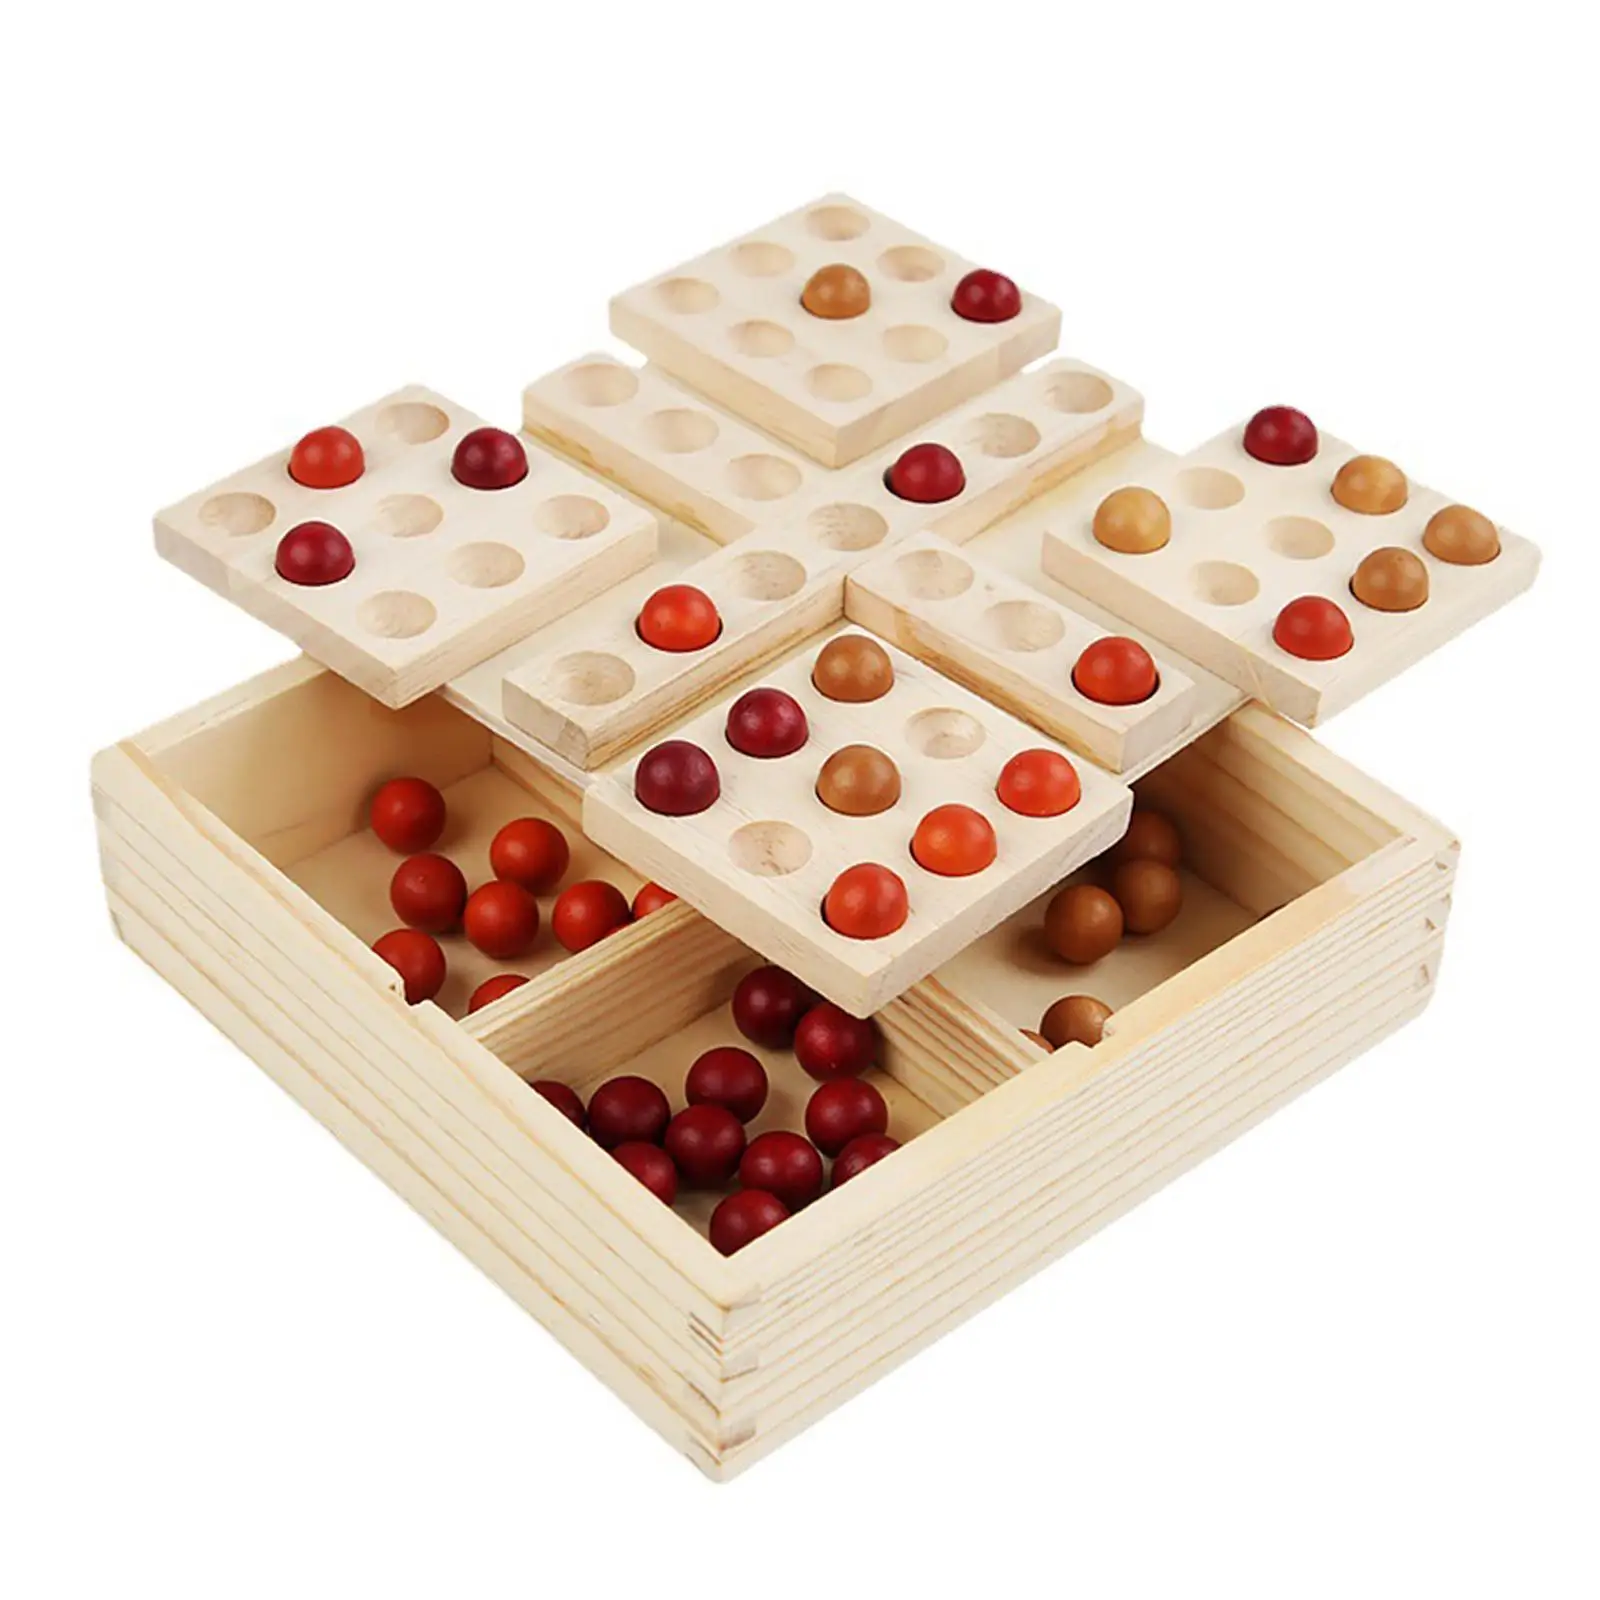 Wood Rotate Gobang Parenting Puzzle Board Game with Beads Travel Interactive Gobang Chess Puzzle Game for Game Gift Party Favors